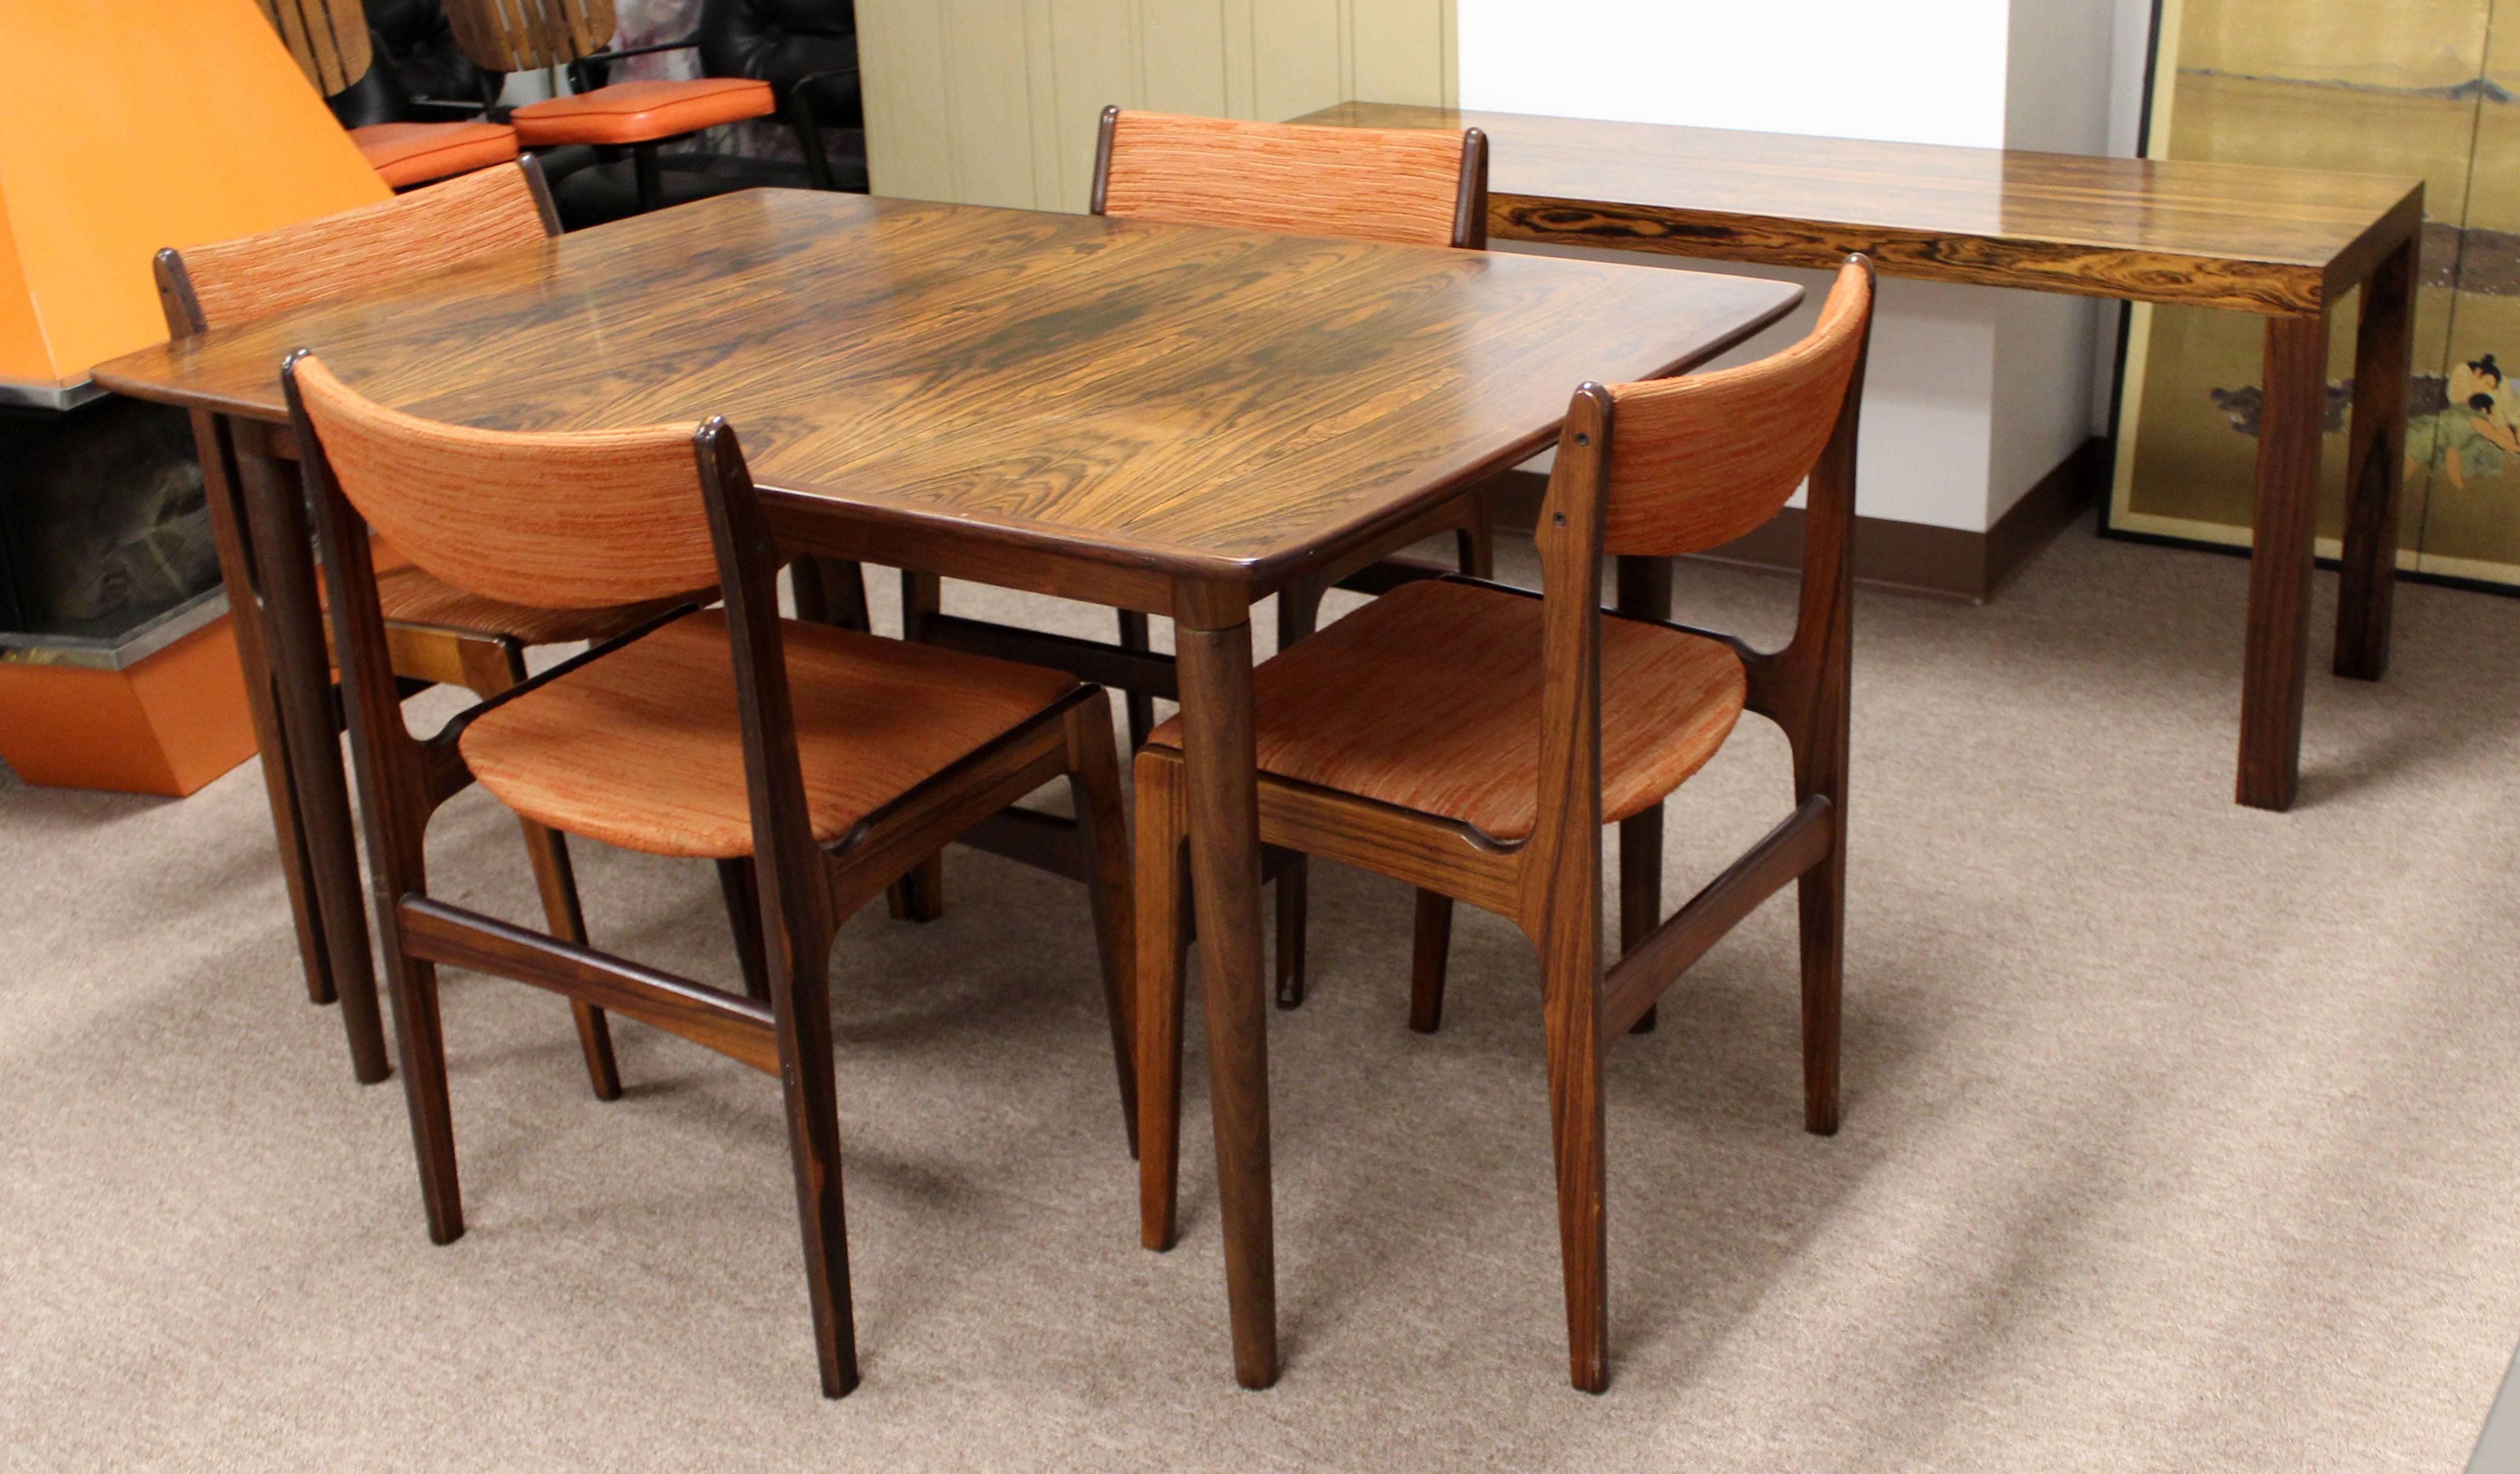 For your consideration is an incredible, rich rosewood dining set, including an expandable table with two leaves and four side chairs. Leaves store in the table. Made in Denmark. In excellent condition. Matching console table available in separate